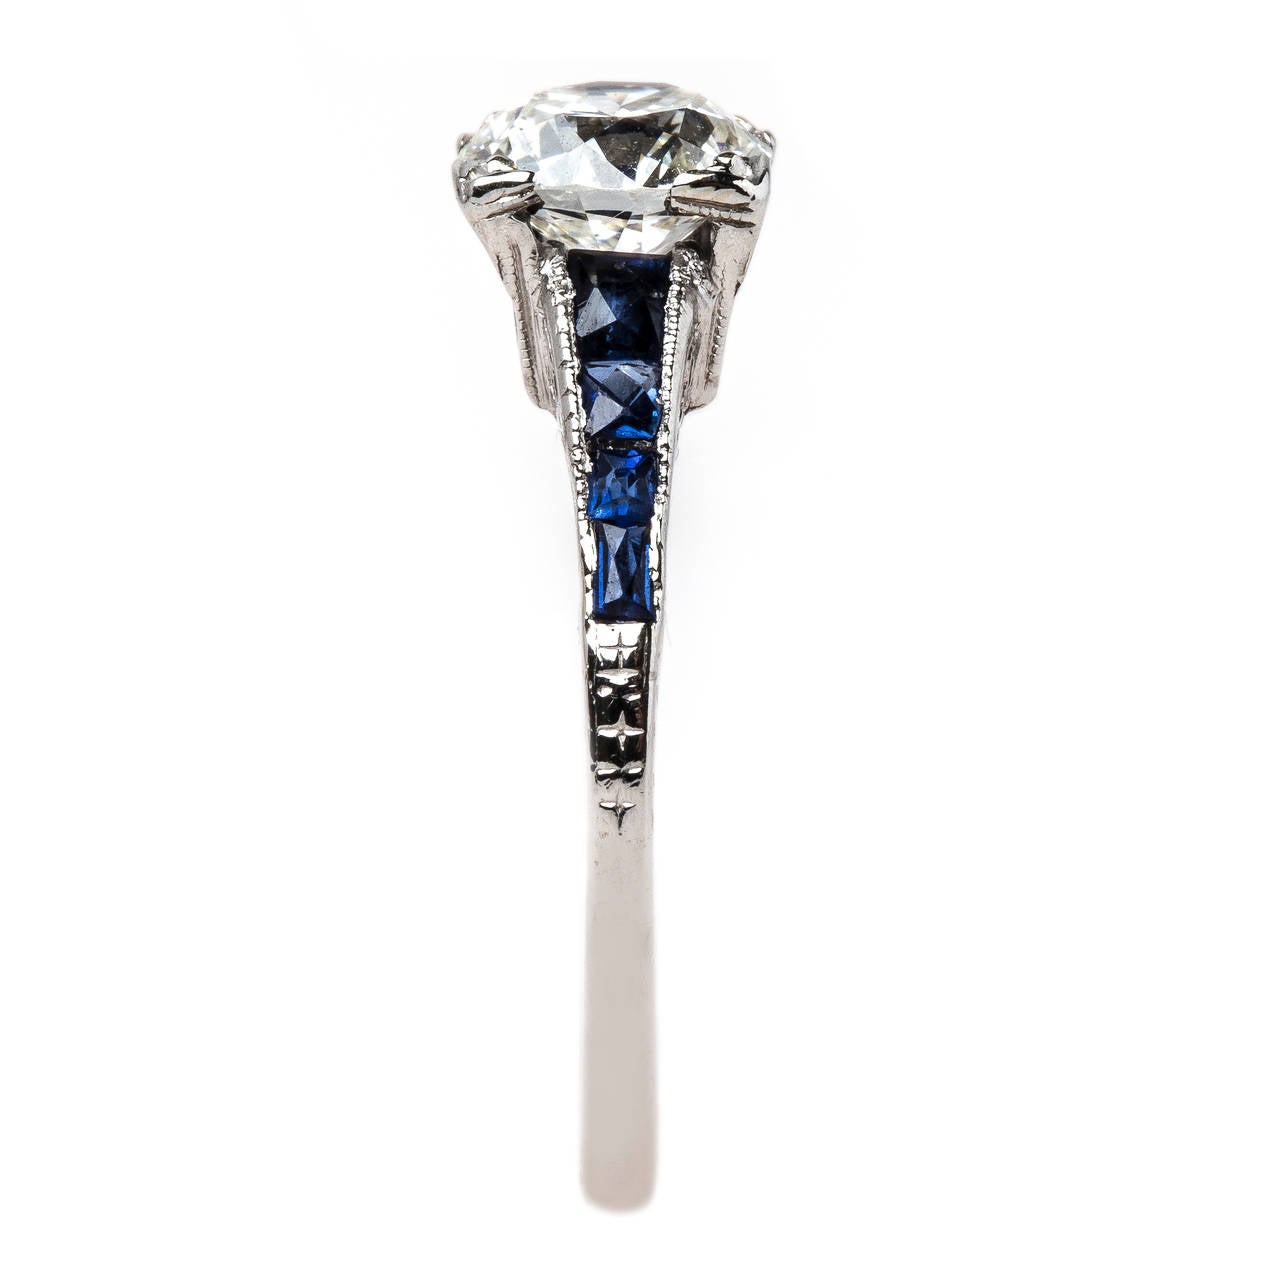 Women's Incredibly Unique Art Deco Ring with Diamond and Sapphire Shoulders